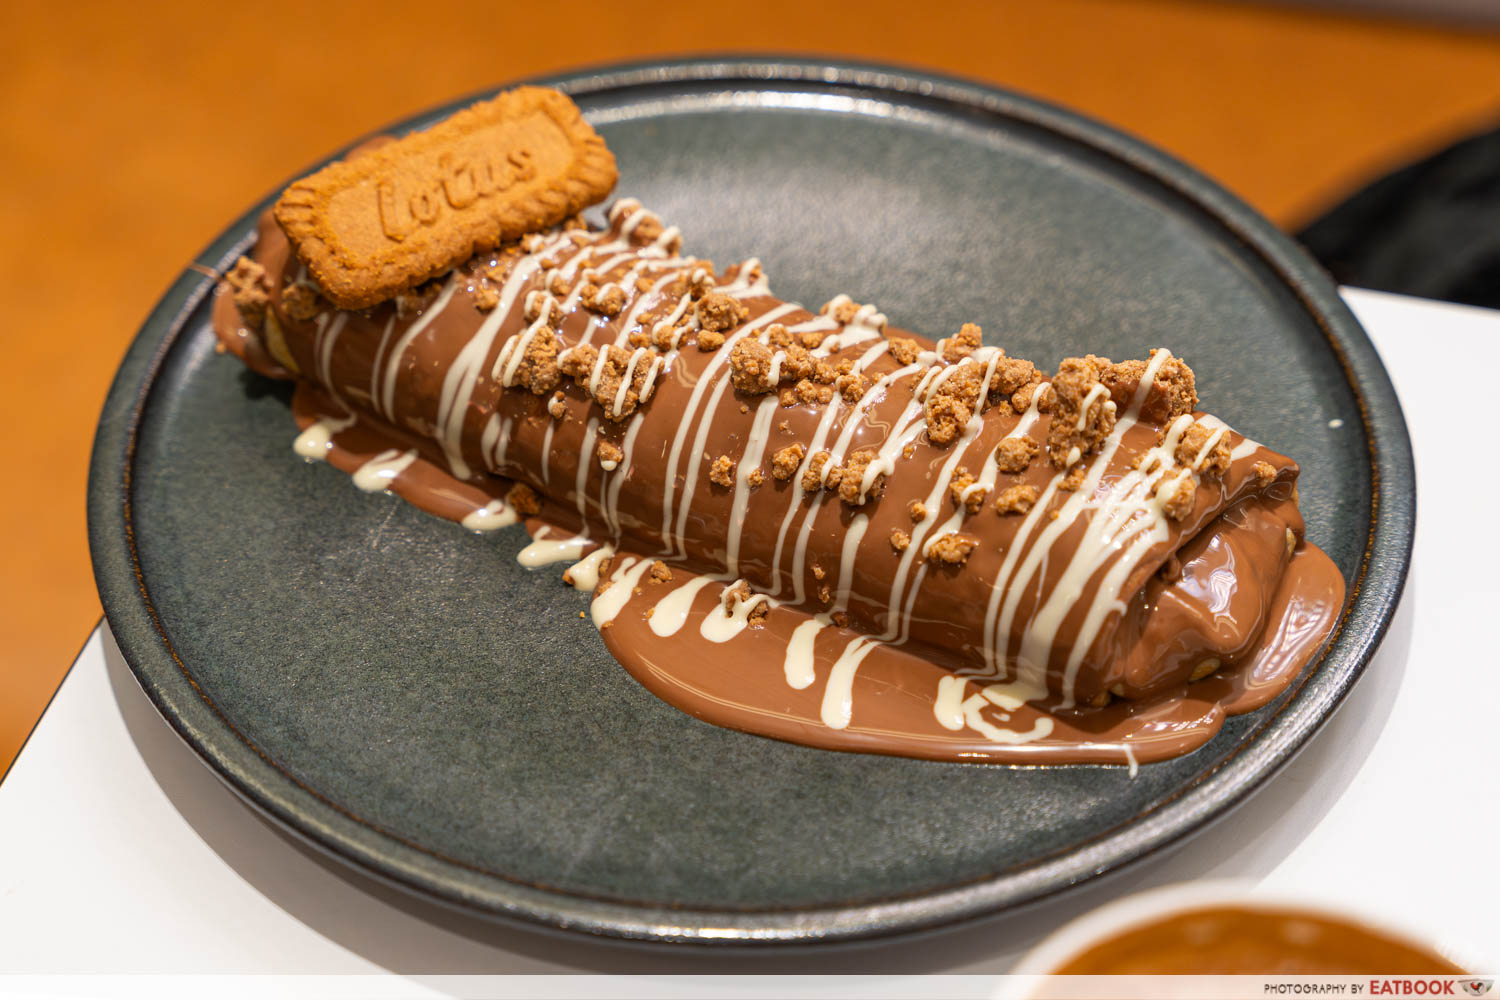 dipndip singapore - mighty speculoos crepe